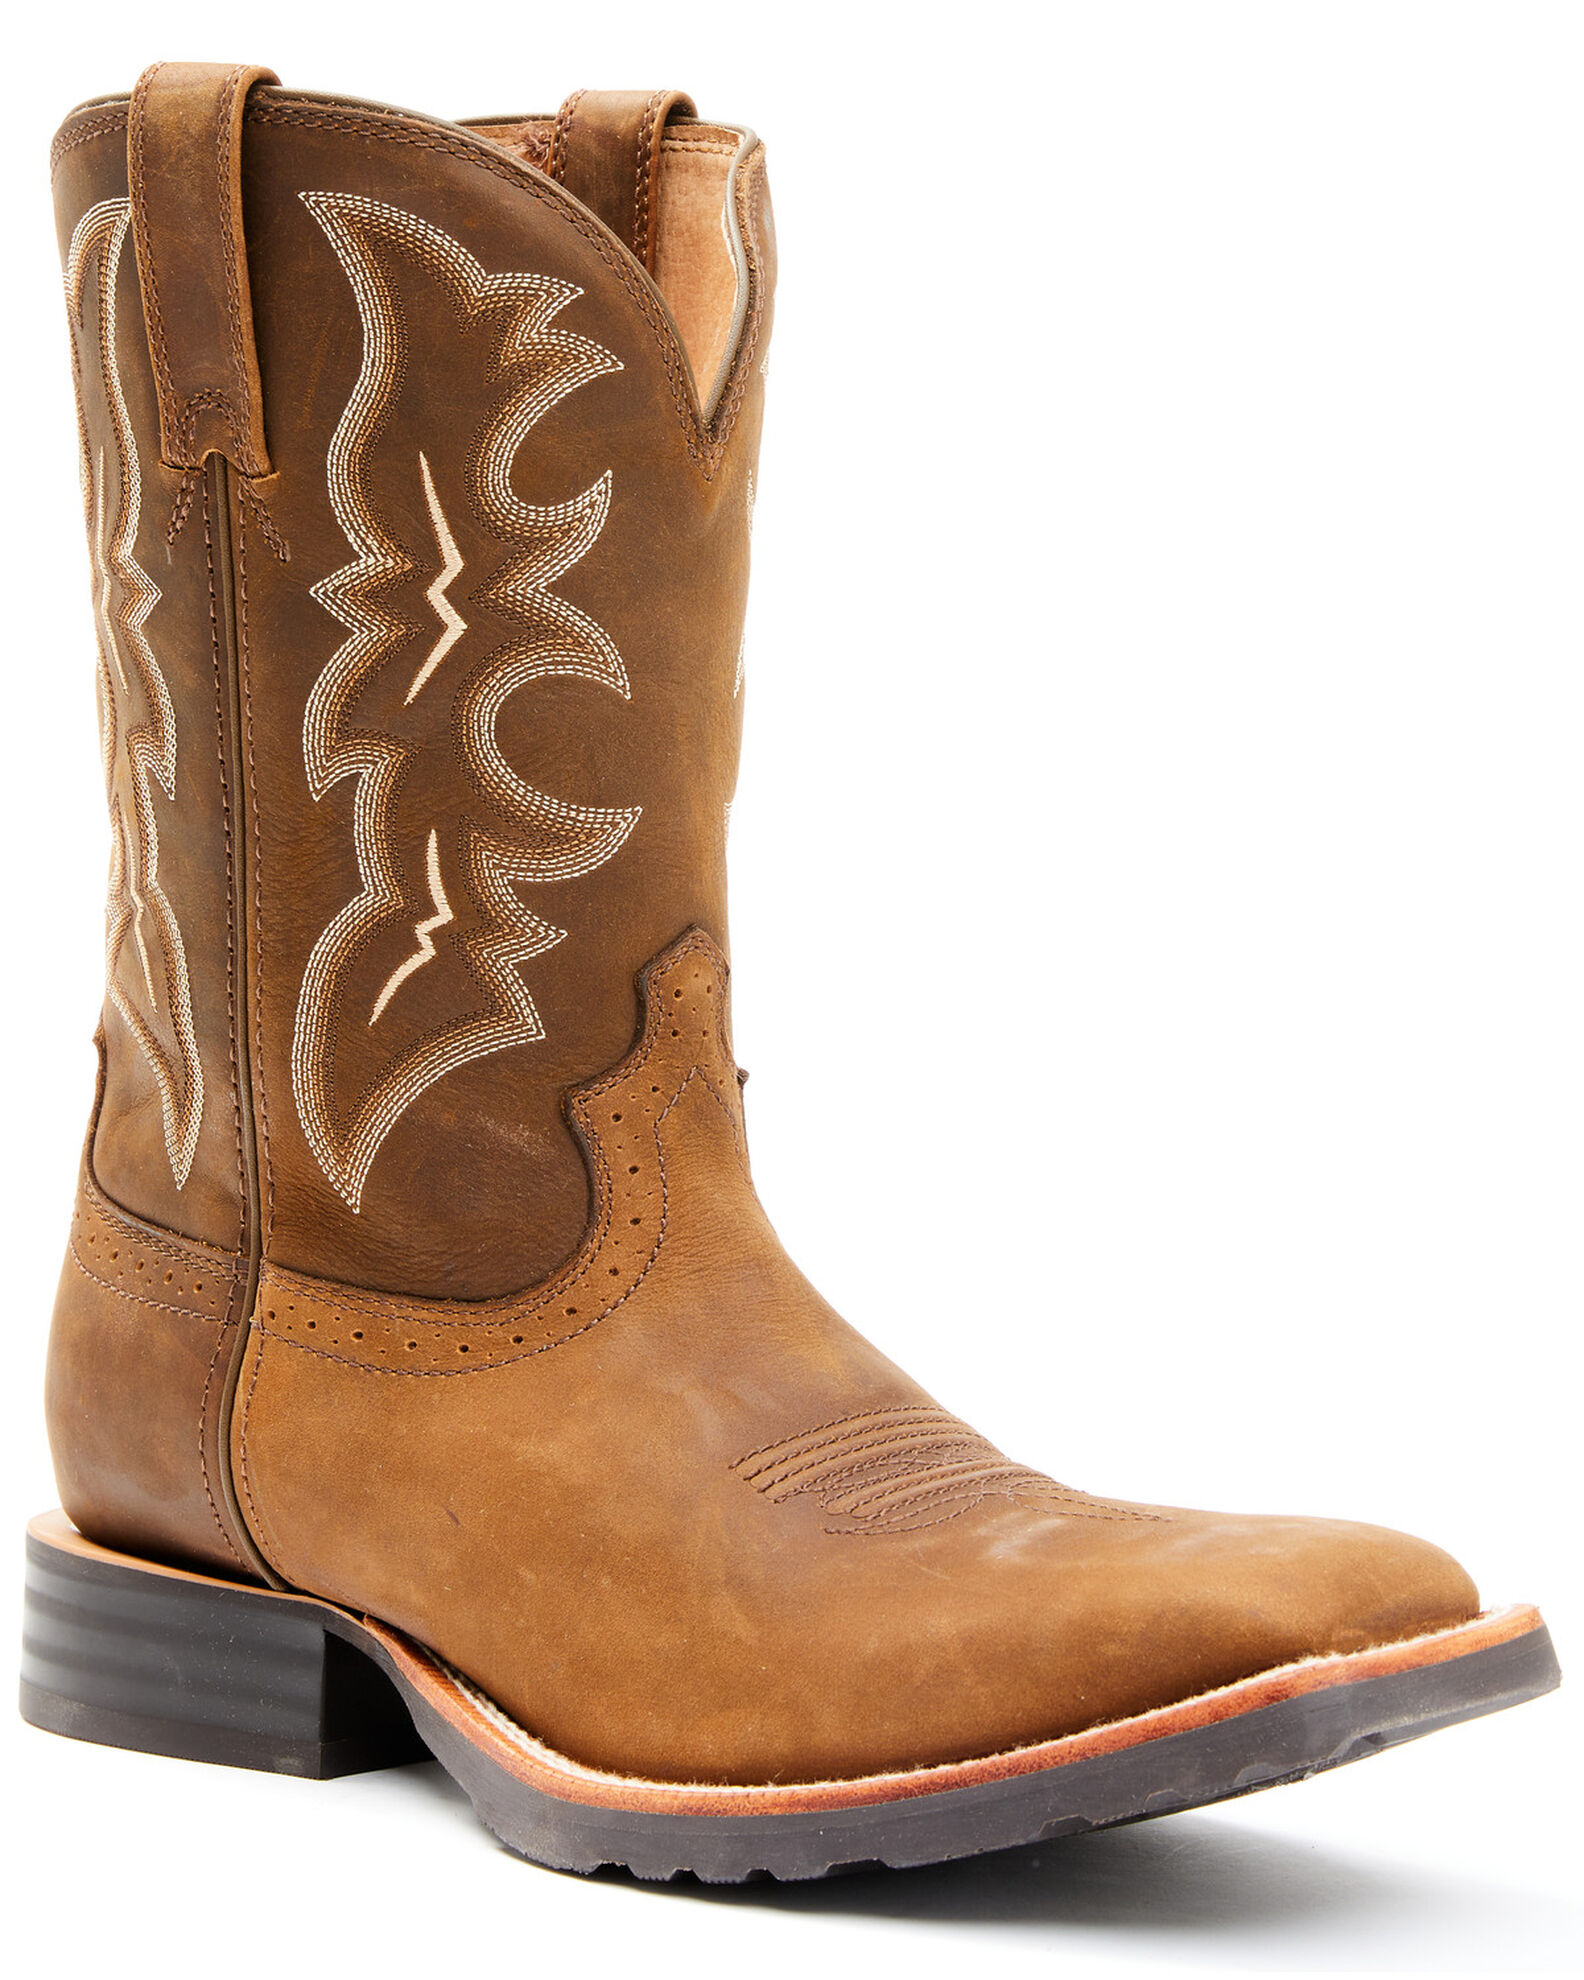 Wrangler Footwear Men's All-Around Western Boots - Broad Square Toe -  Country Outfitter